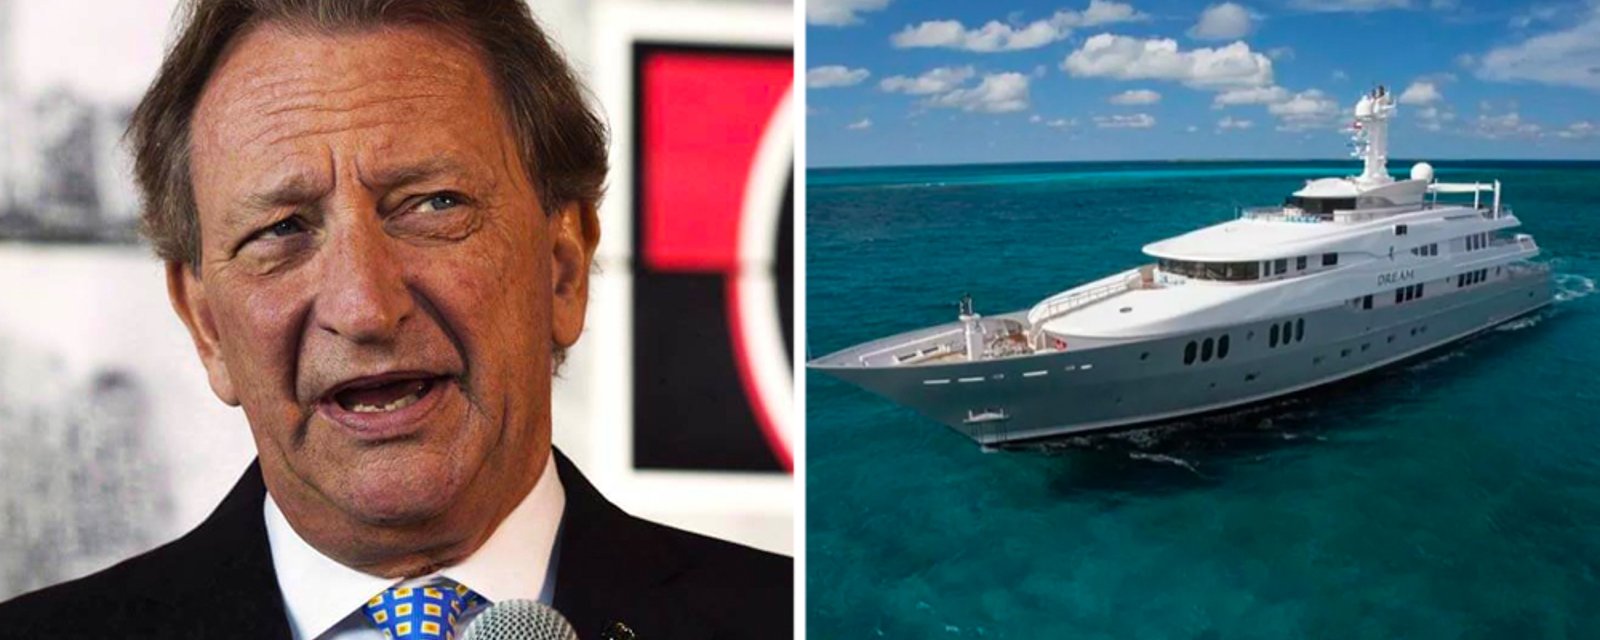 Sens owner Eugene Melnyk's pandemic yacht vacation went hilariously awful, according to lawsuit